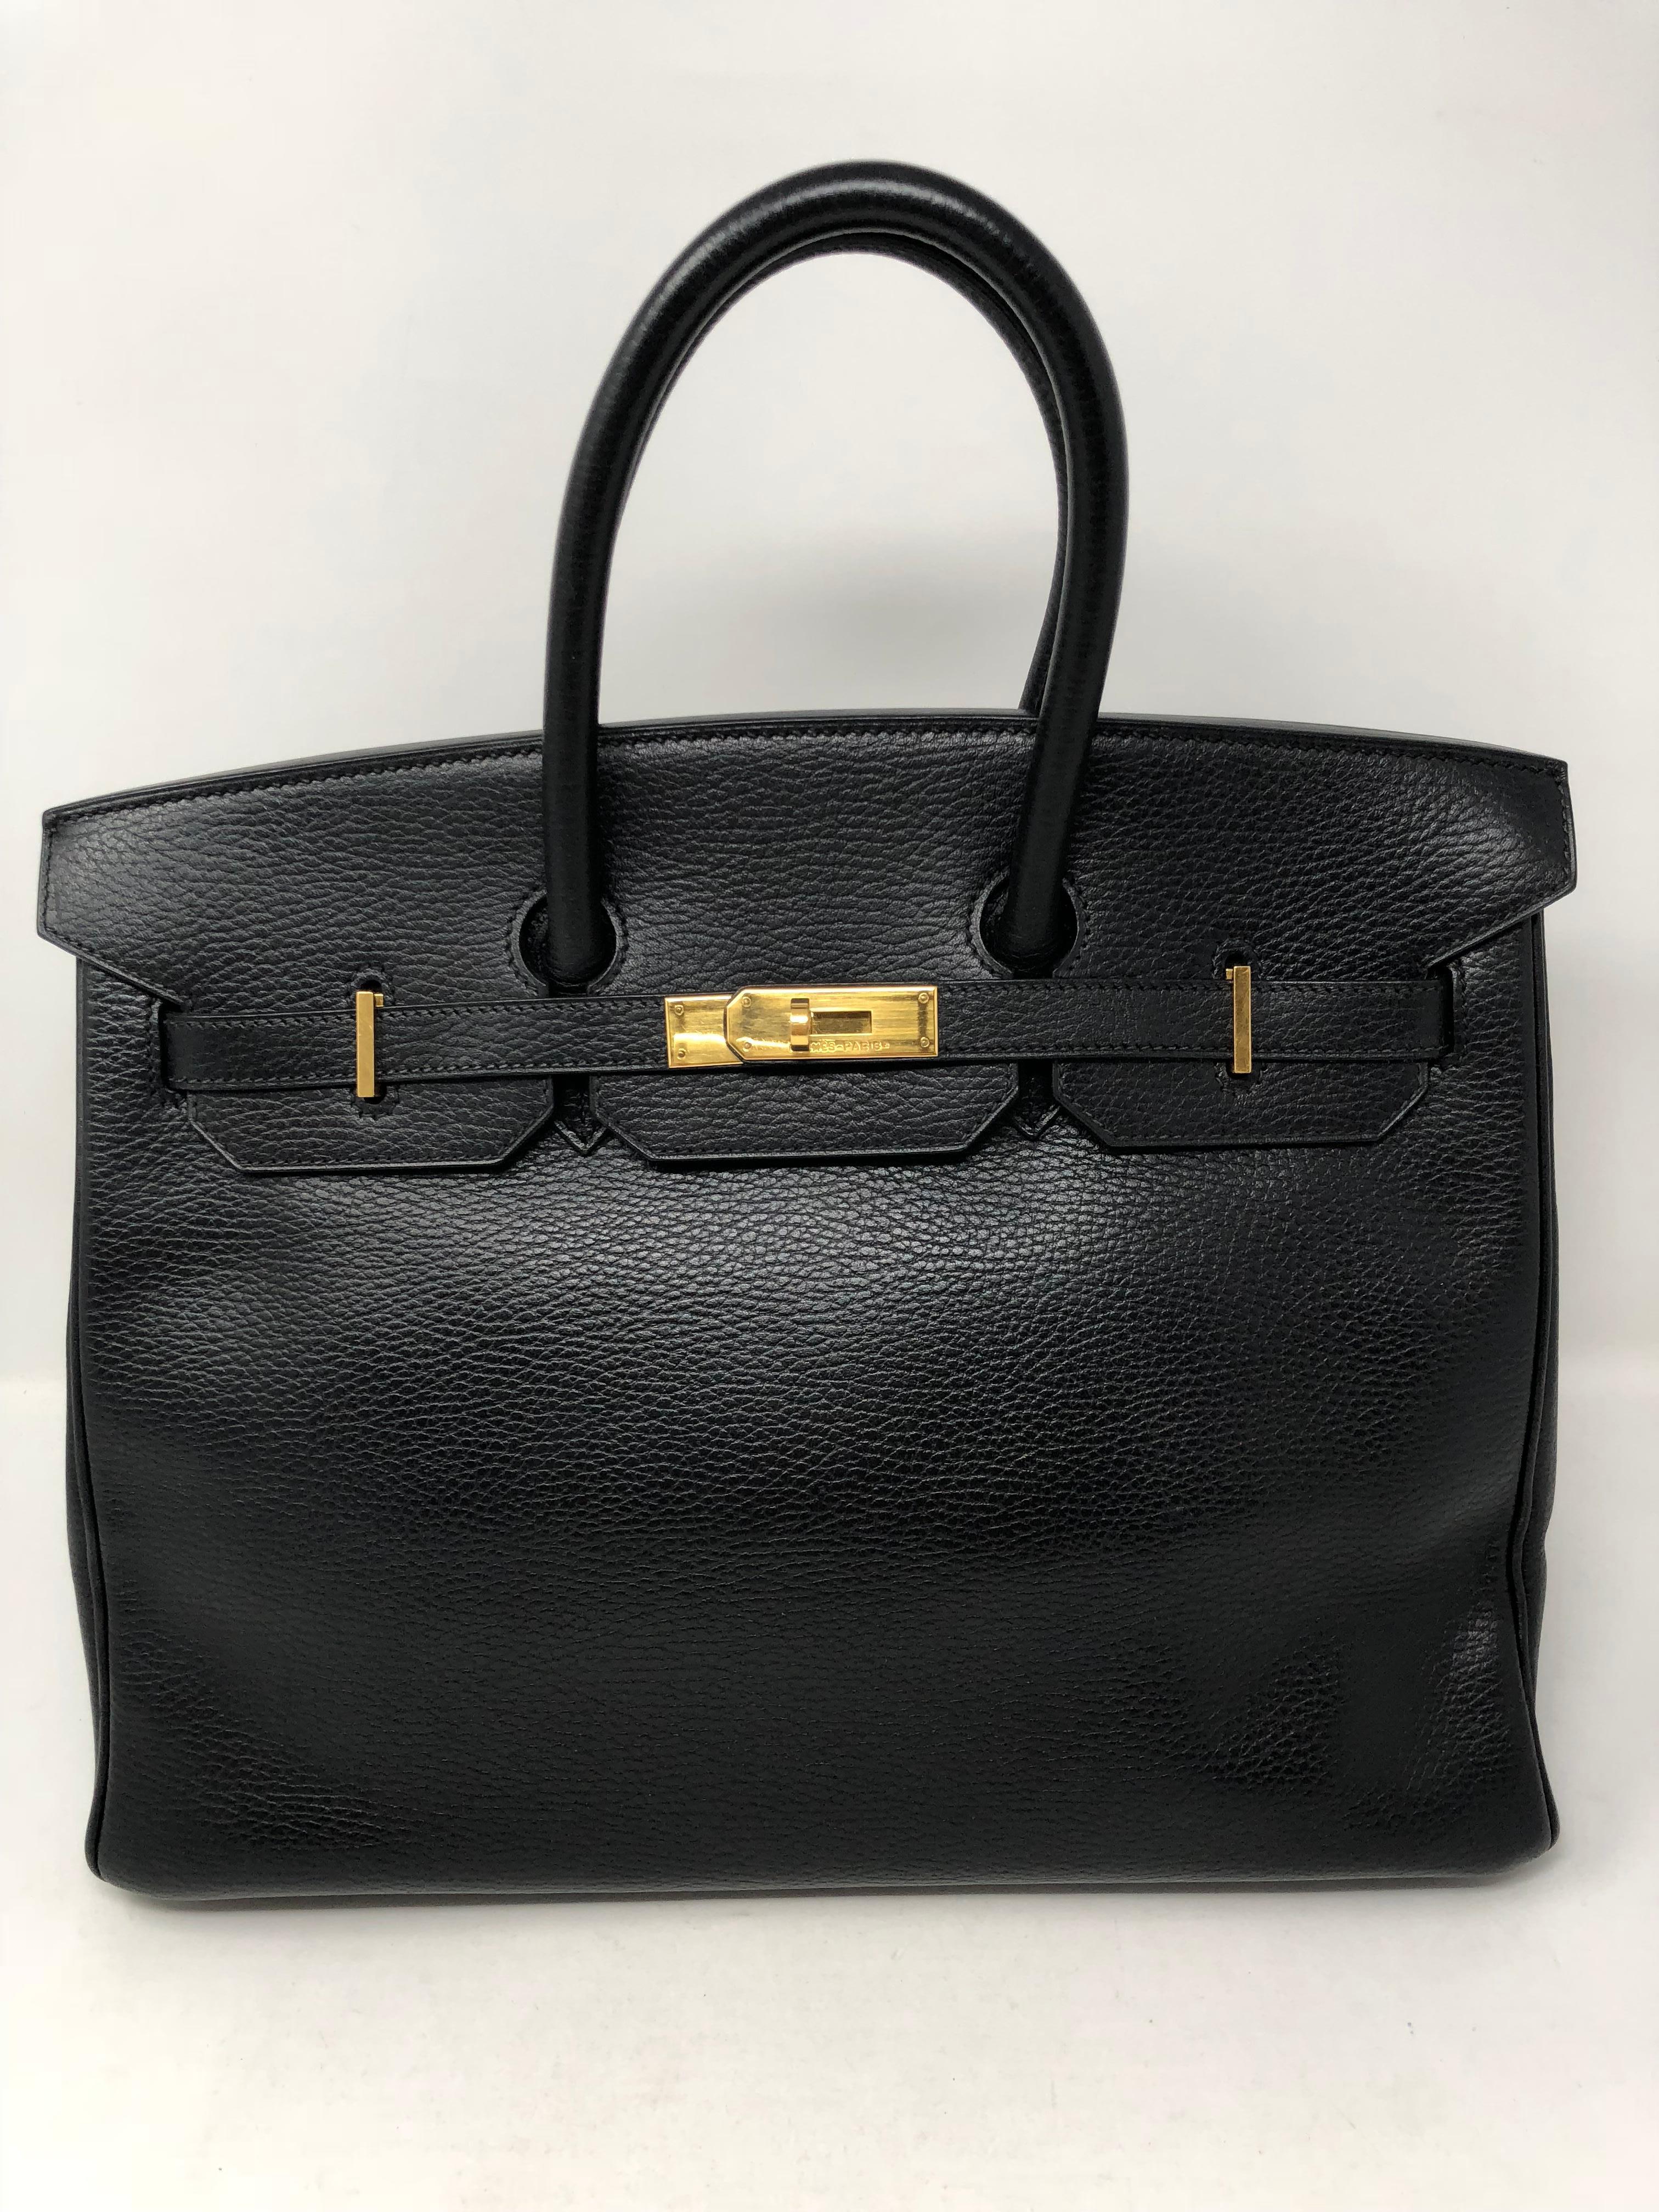 Hermes Black Birkin 35 Ardennes leather. Gold hardware. G square. From 2003. Good condition. Guaranteed authentic.